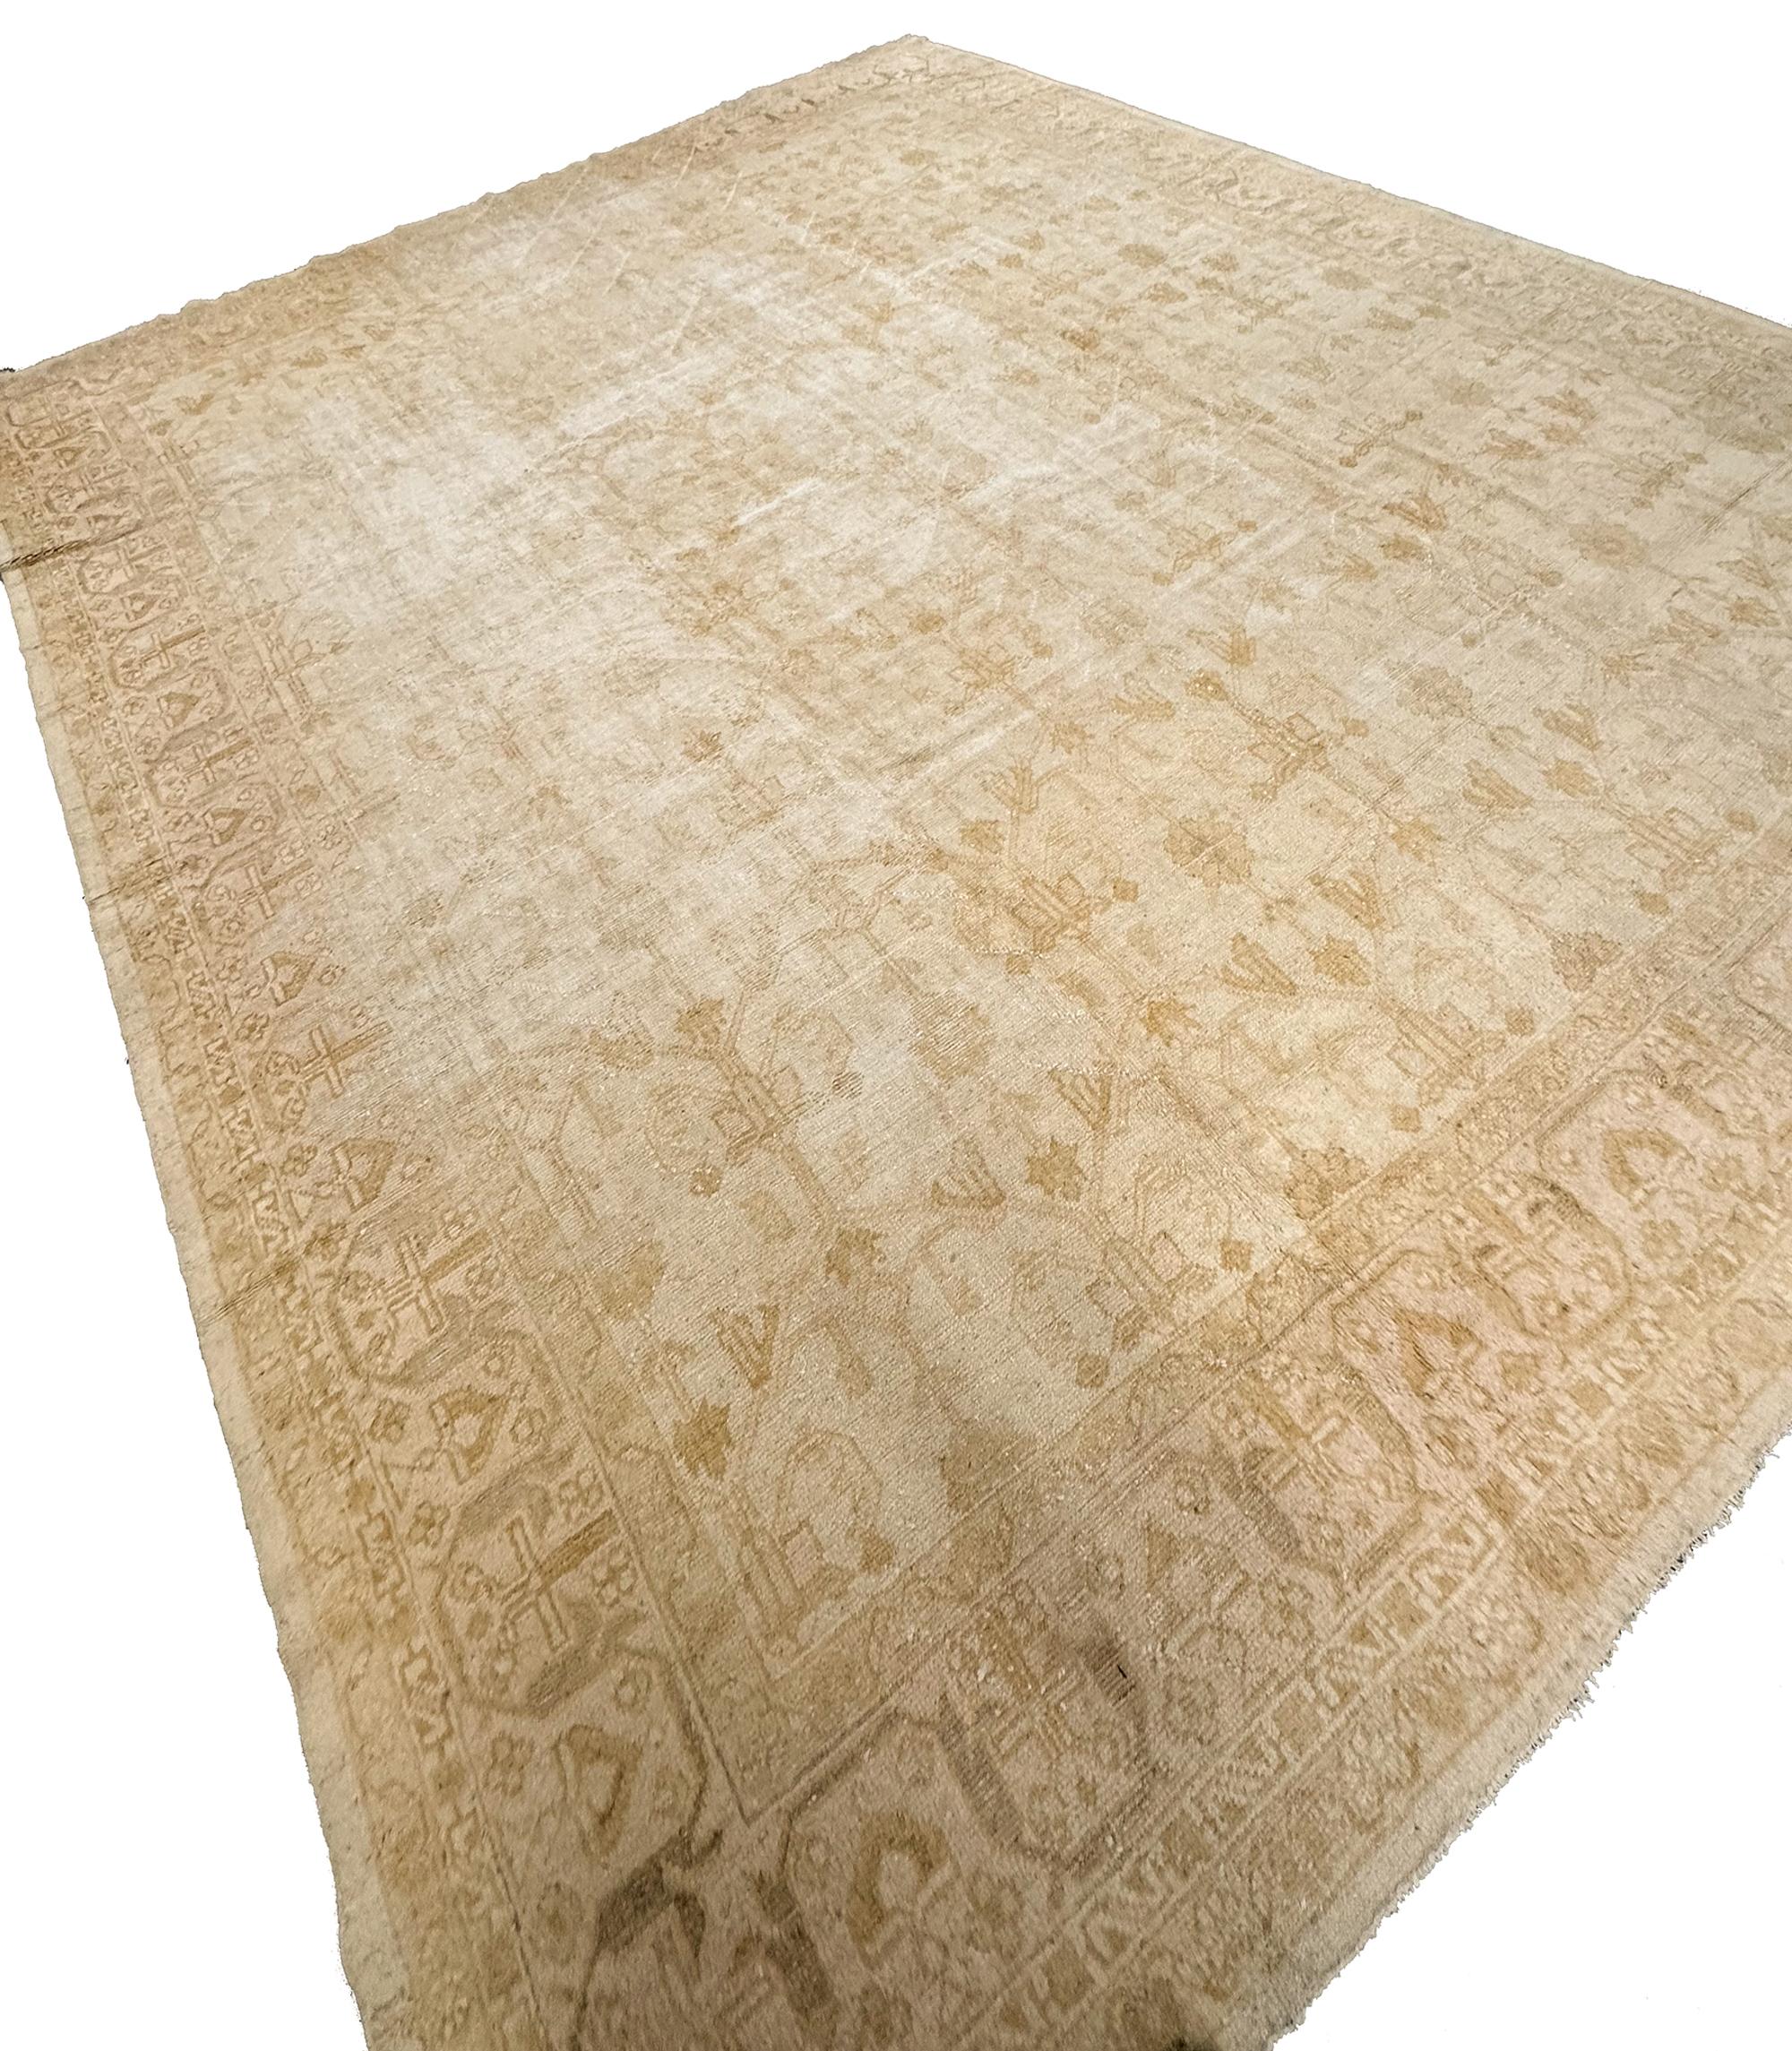 1880 Auhtentic Antique Turkish Oushak Geometric overall 12x15 366cm x 442cm In Good Condition For Sale In New York, NY